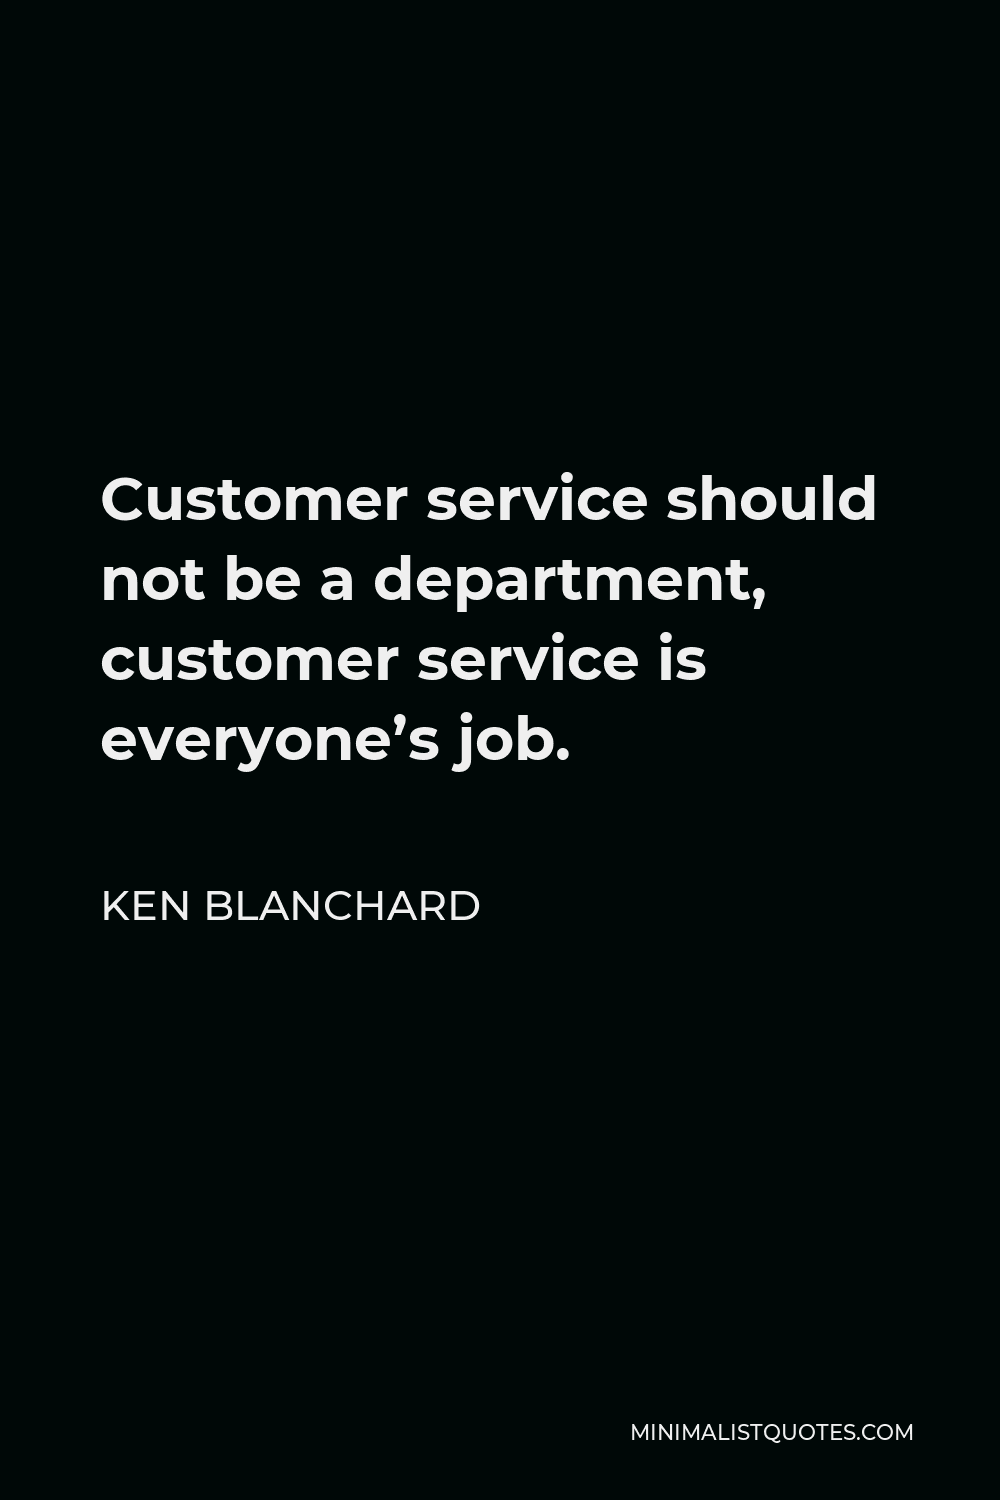 Ken Blanchard Quote - Customer service should not be a department, customer service is everyone’s job.